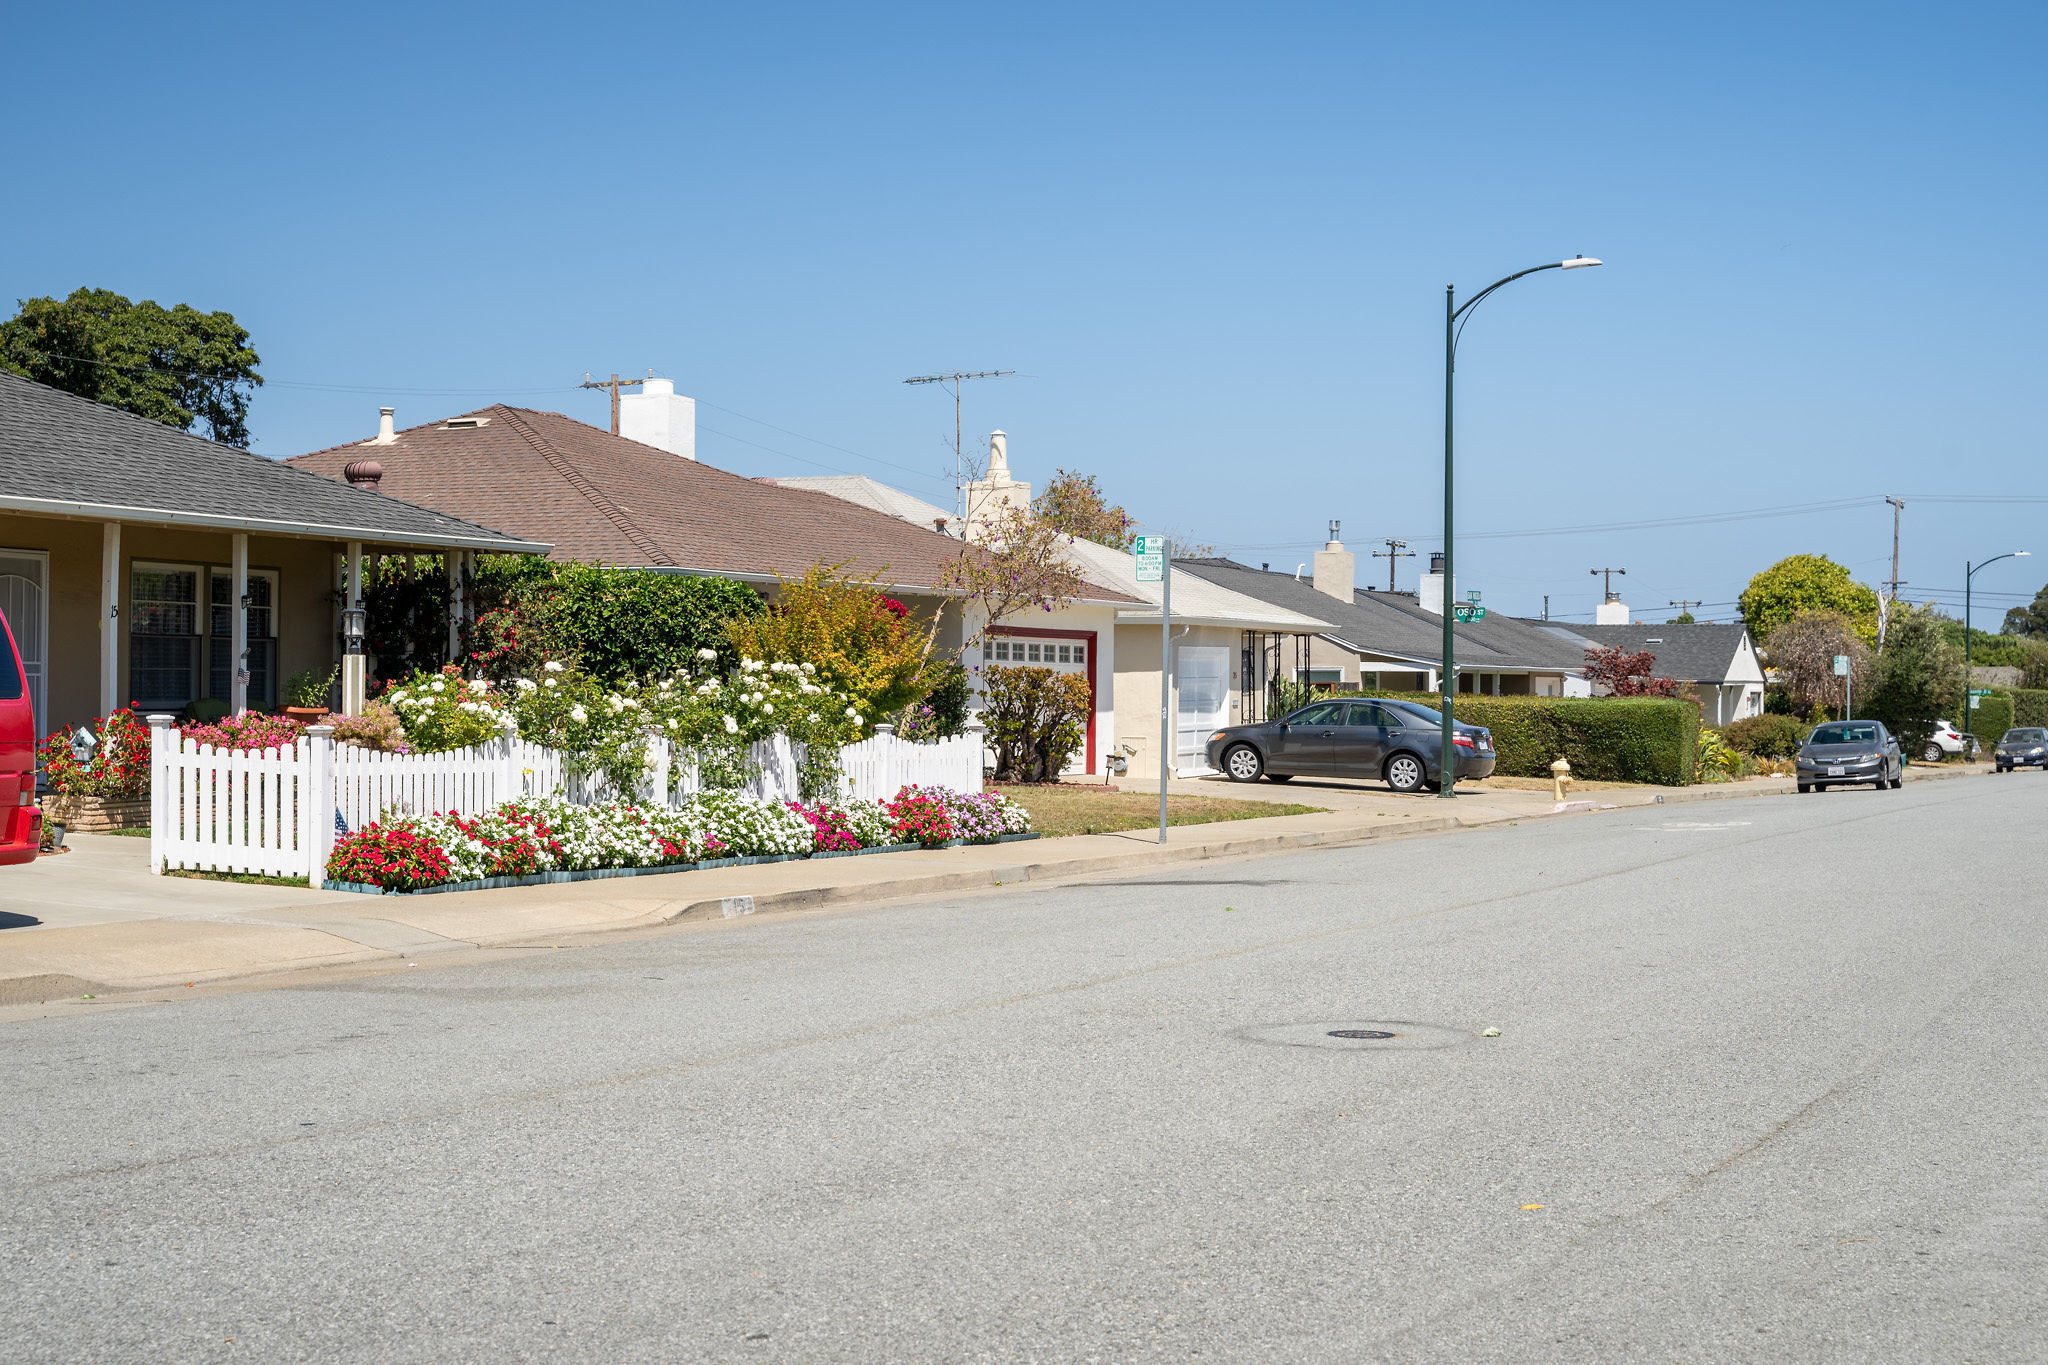 Street view with flowers bordering sidewalk in The Village area in San Mateo